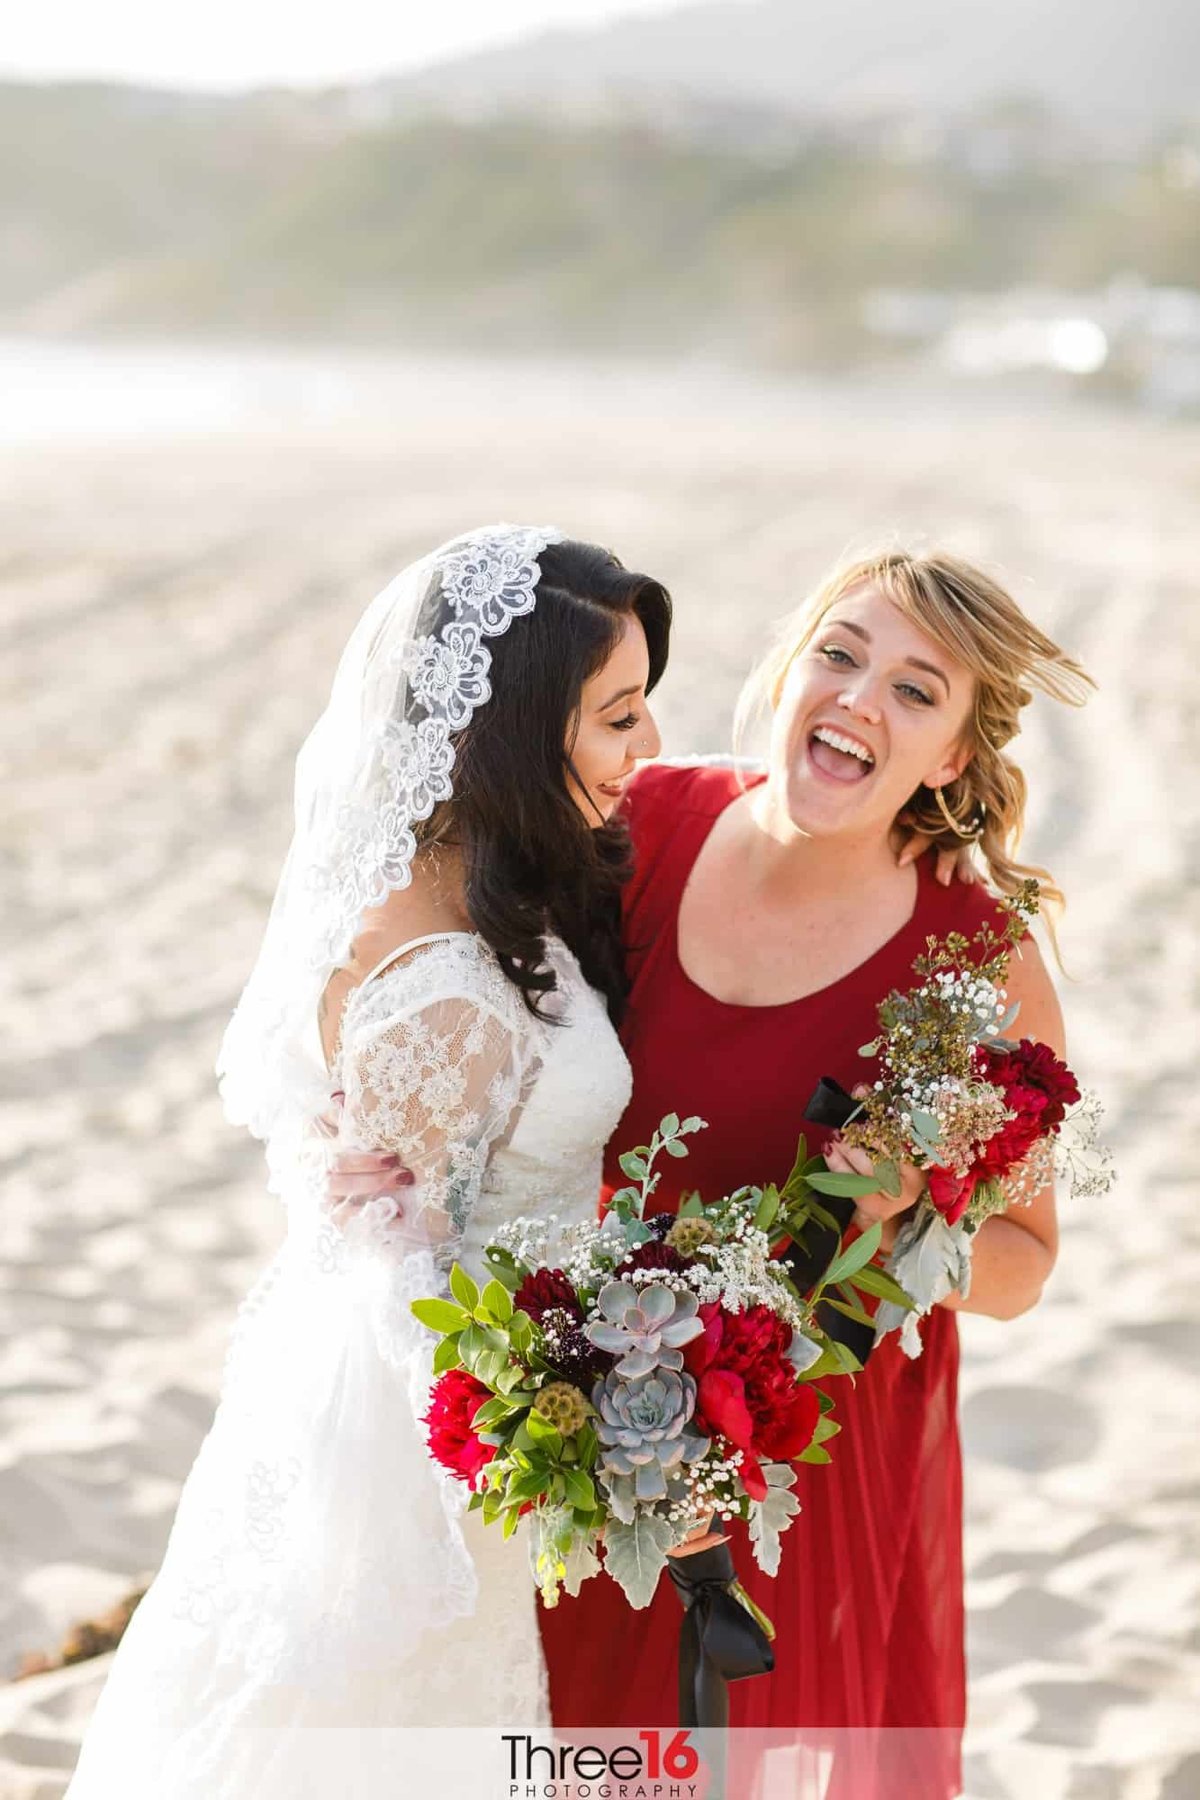 Bride shares a light moment with one of her Bridesmaids that is dressed in red